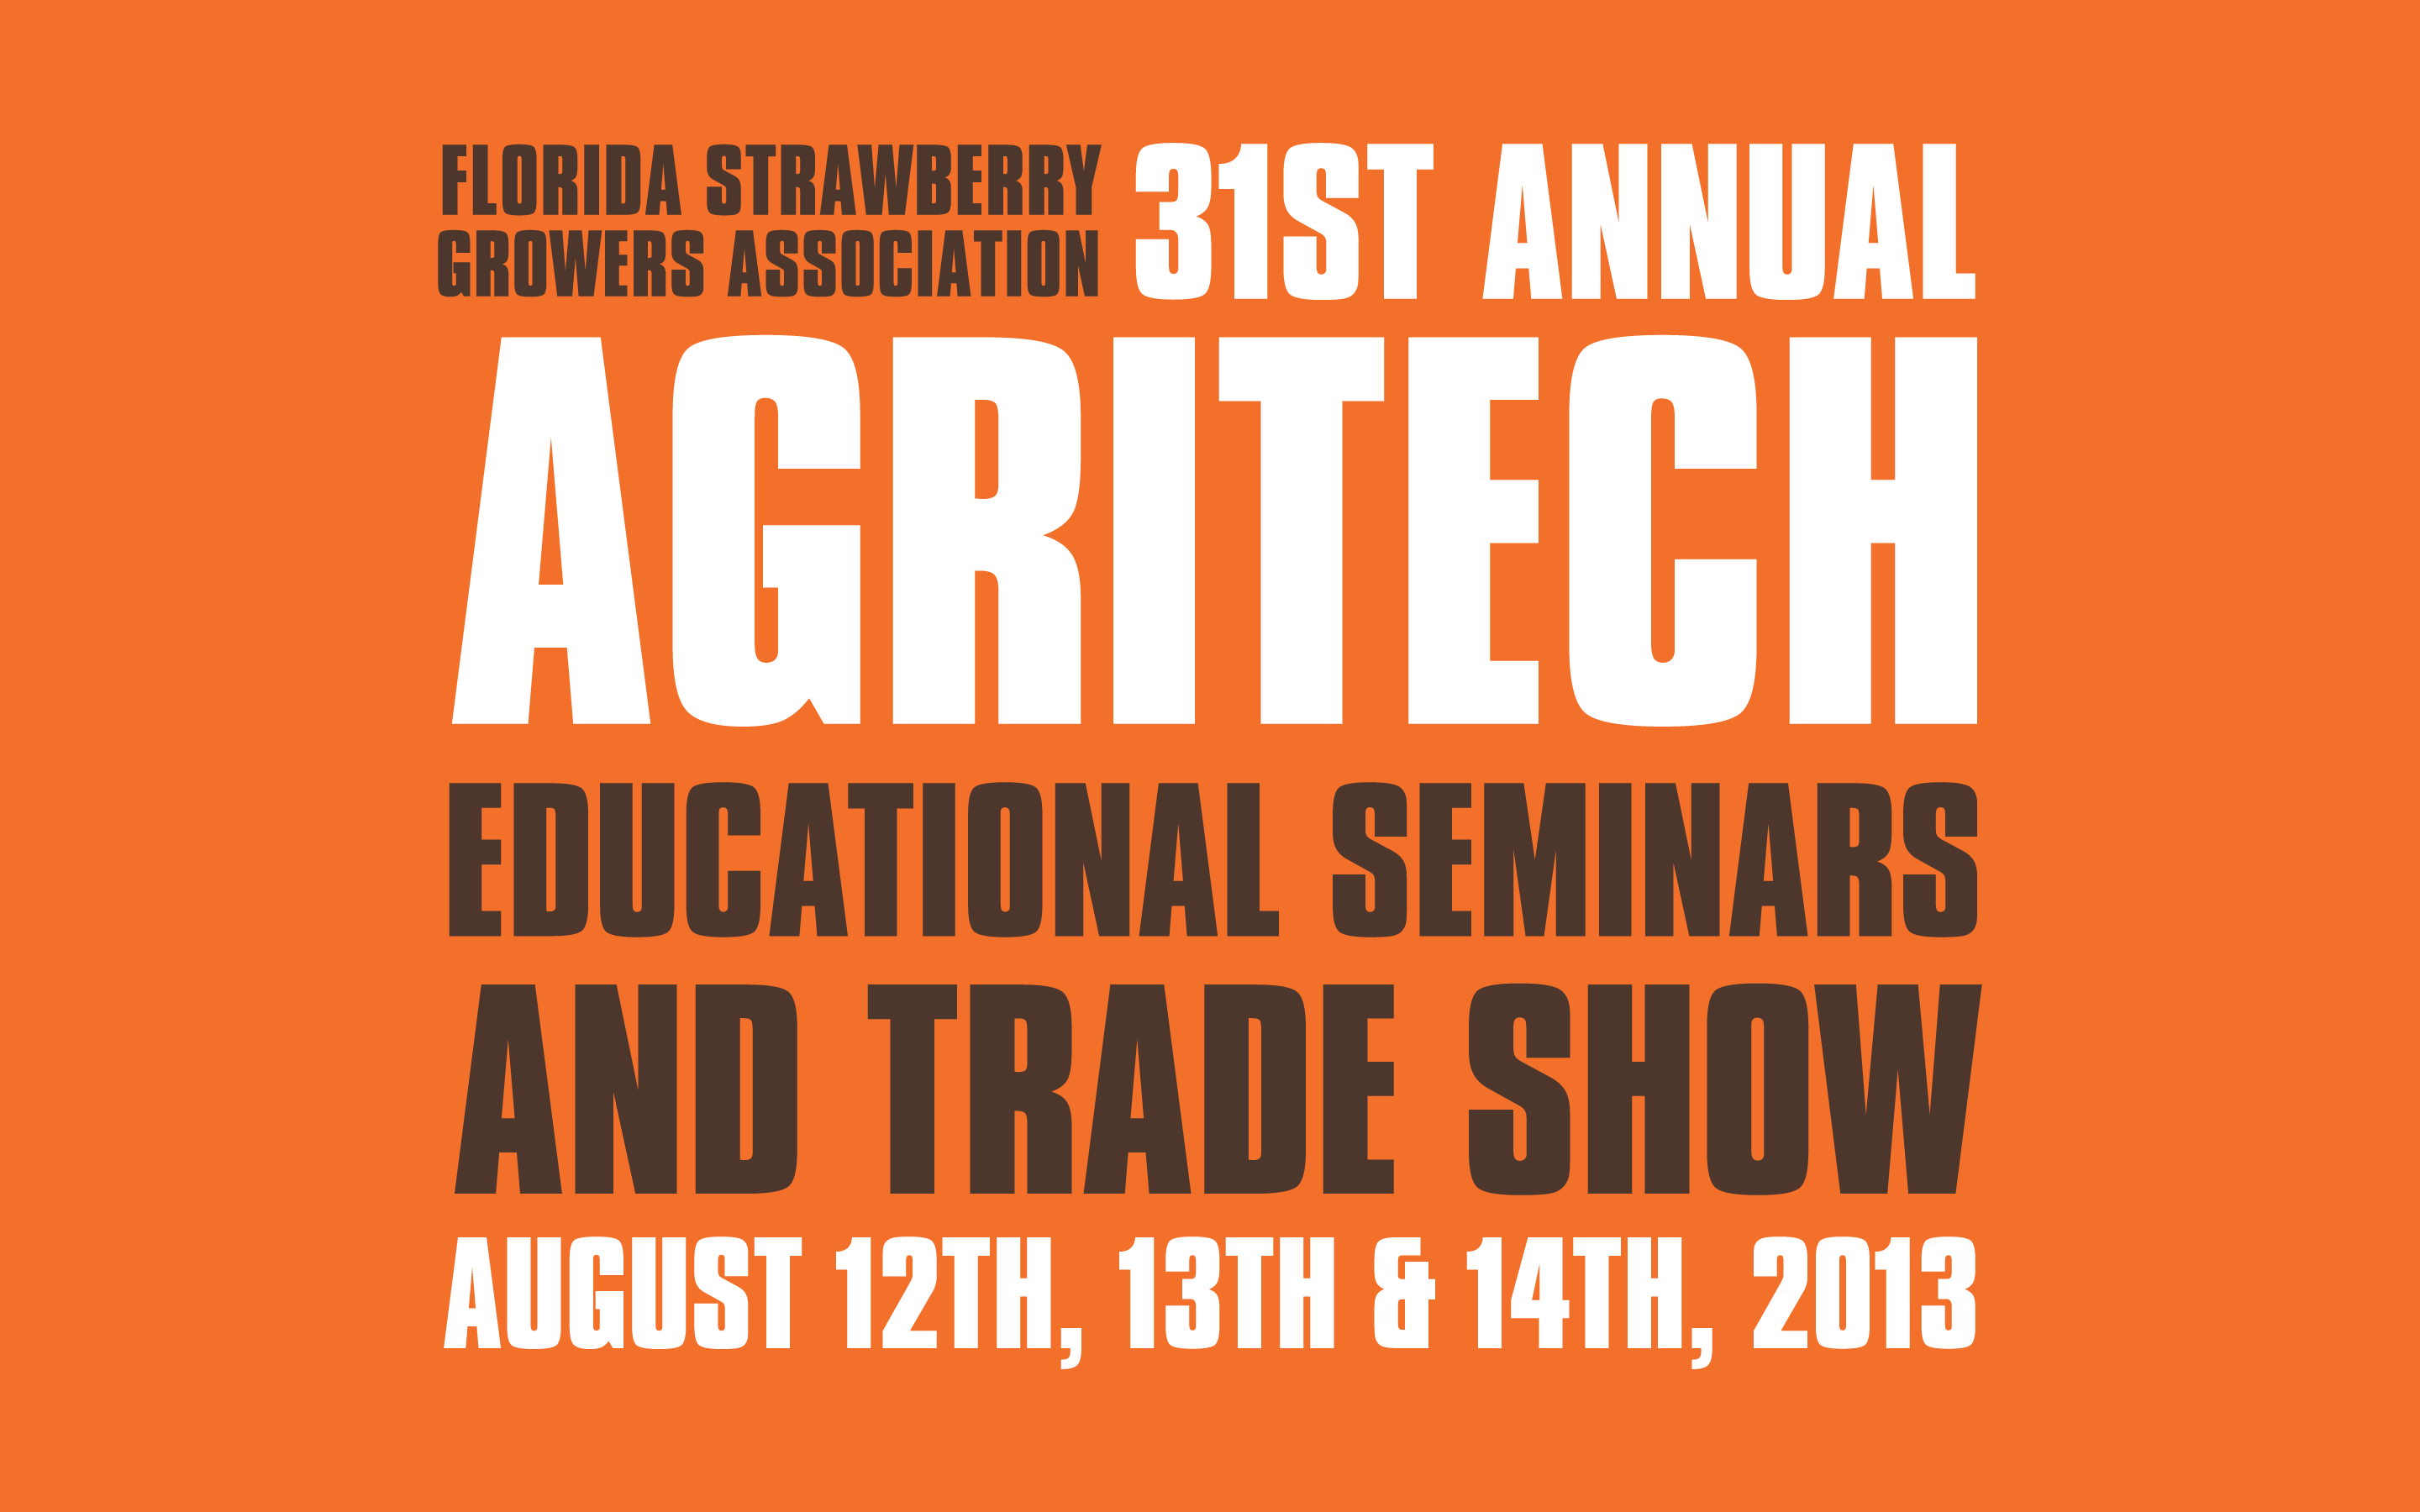 The 31st annual Agritech is hosted by the Florida Strawberry Growers Association and runs August 12-14, 2013 at the John R. Trinkle Building in Plant City, FL.